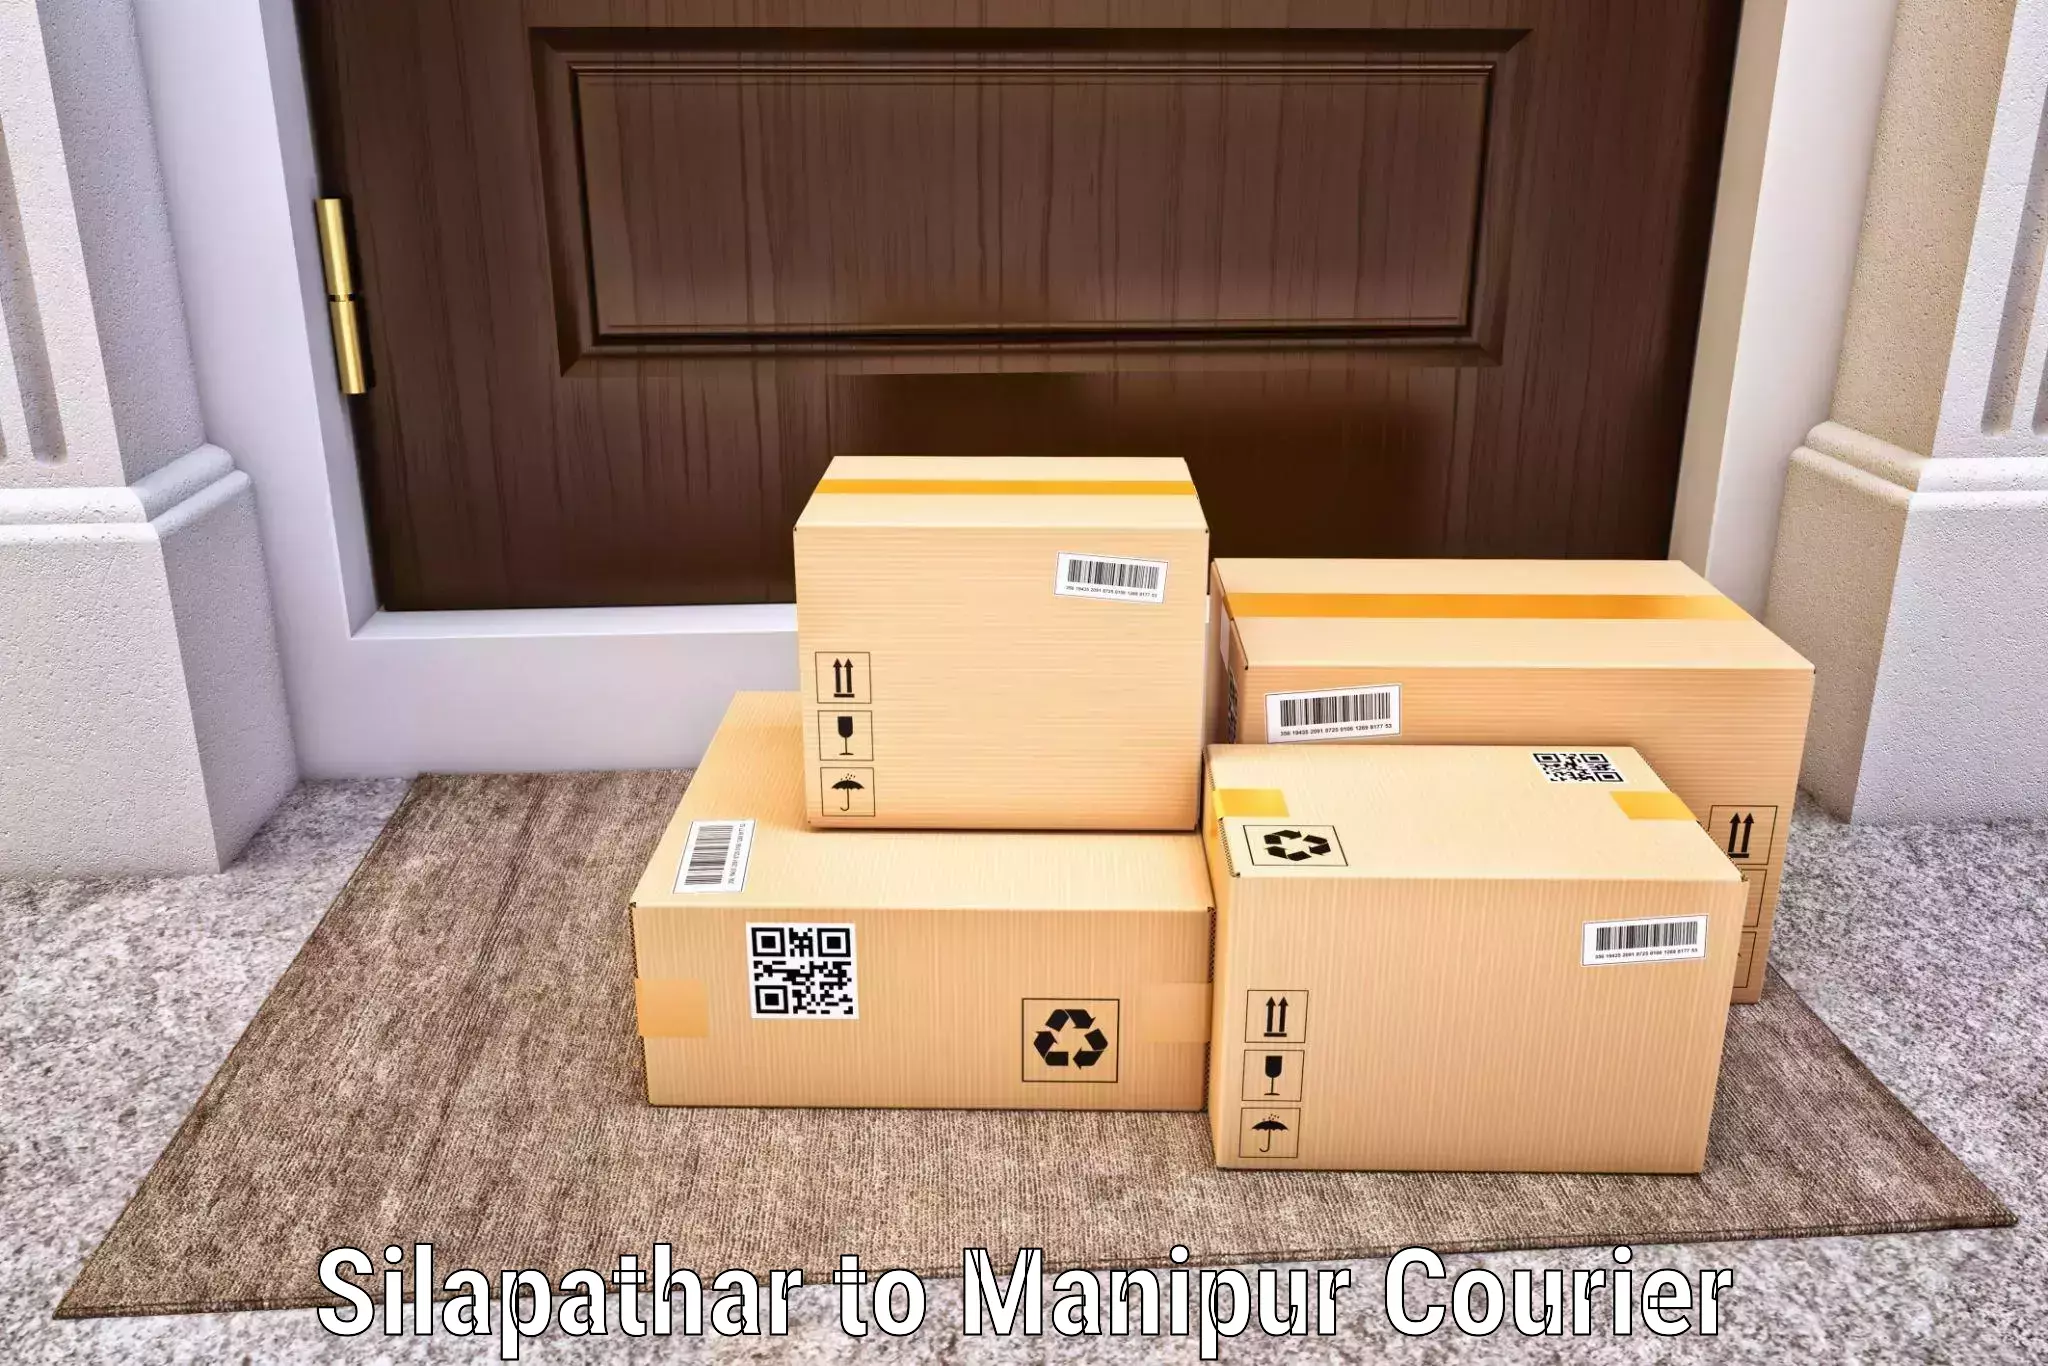 Global shipping networks Silapathar to Manipur